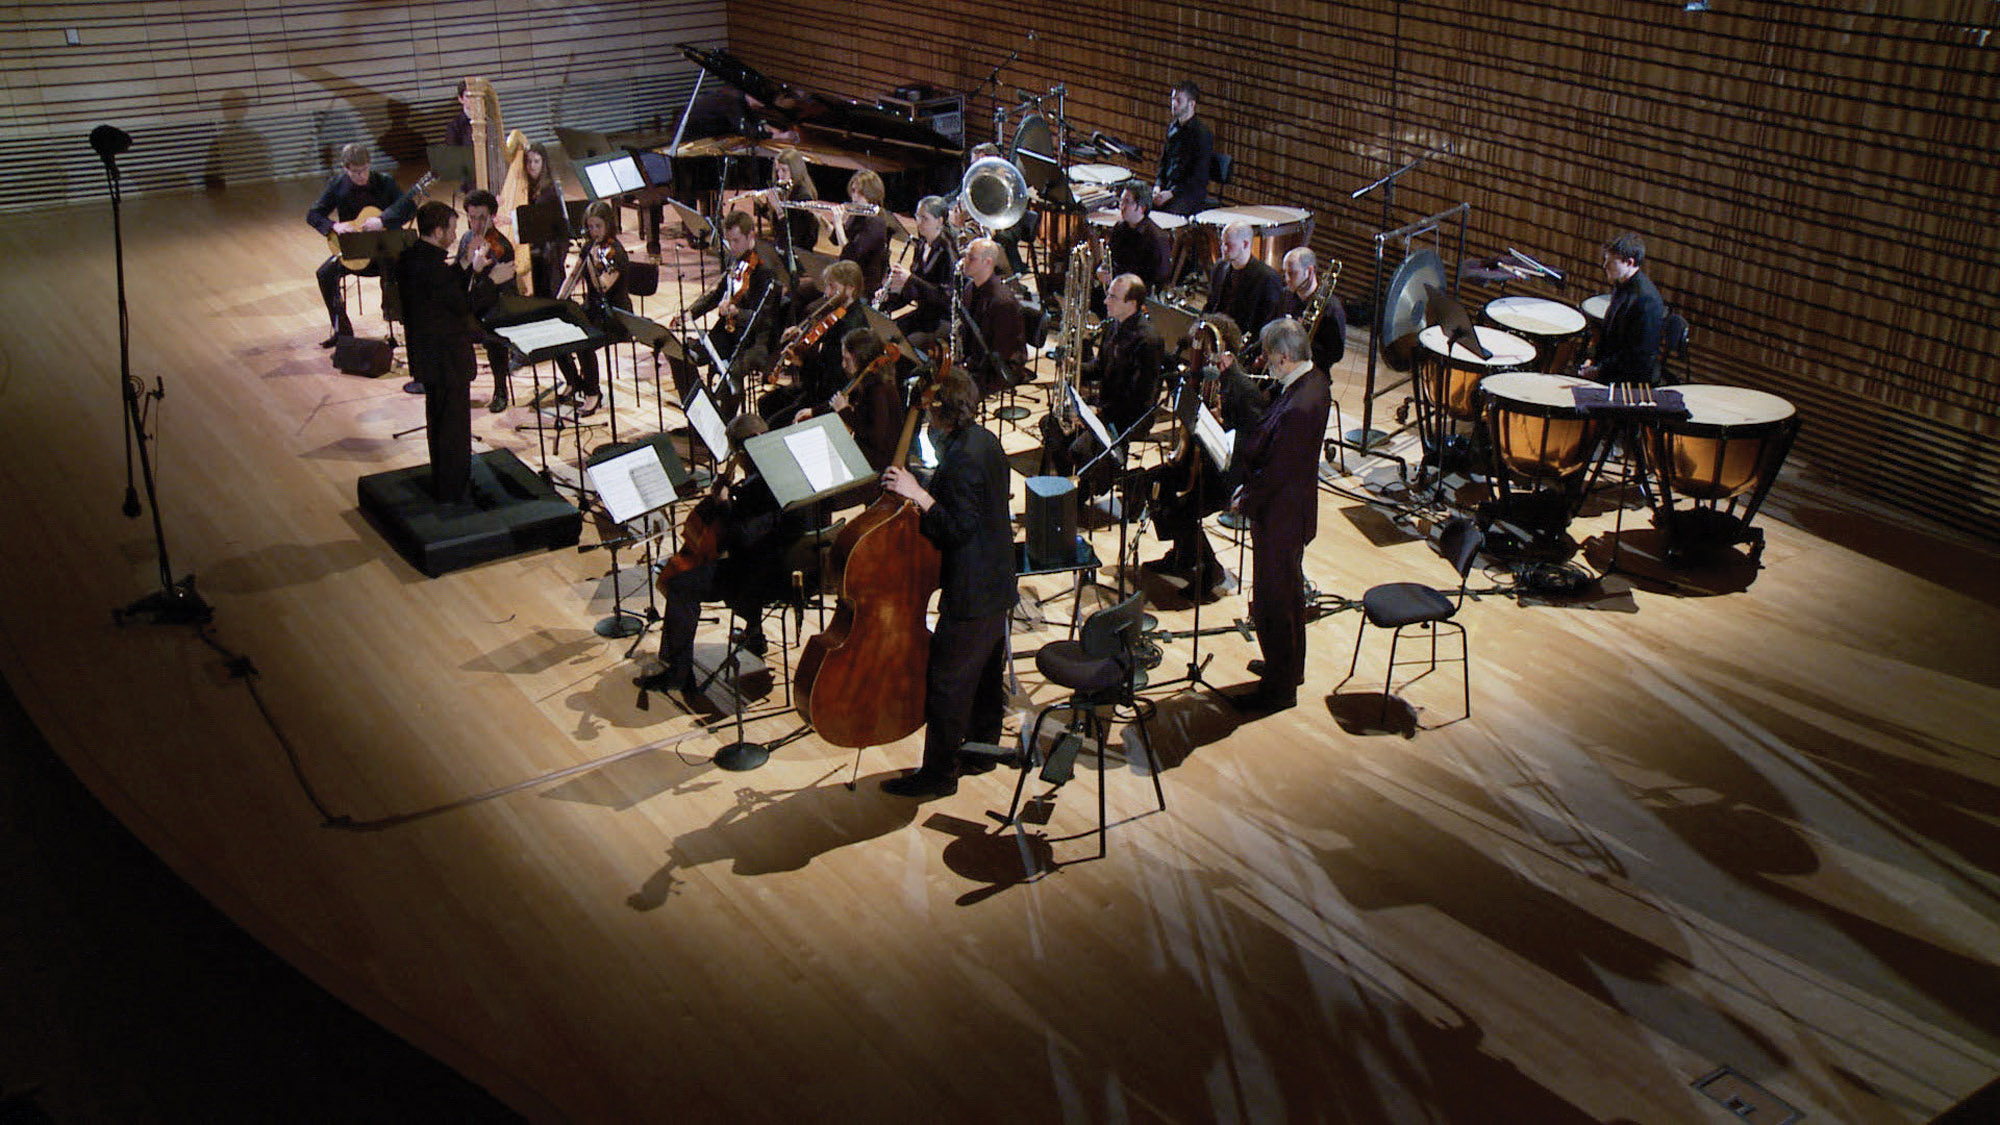 An orchestra dressed in black playing in the concert hall stage. 